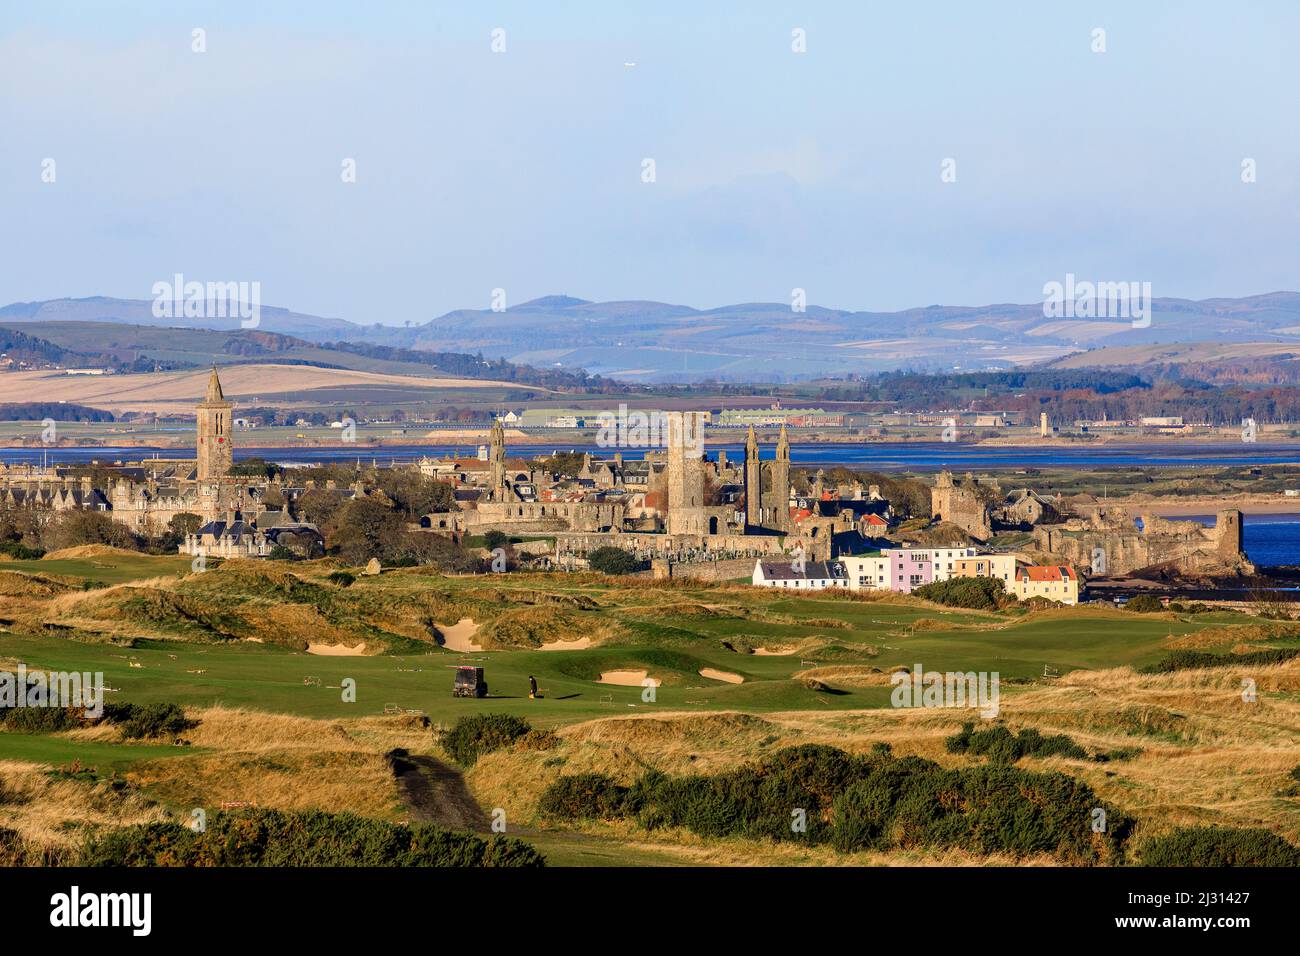 View over St Andrews, golf course and cathedral ruins, Fife, Scotland, UK Stock Photo